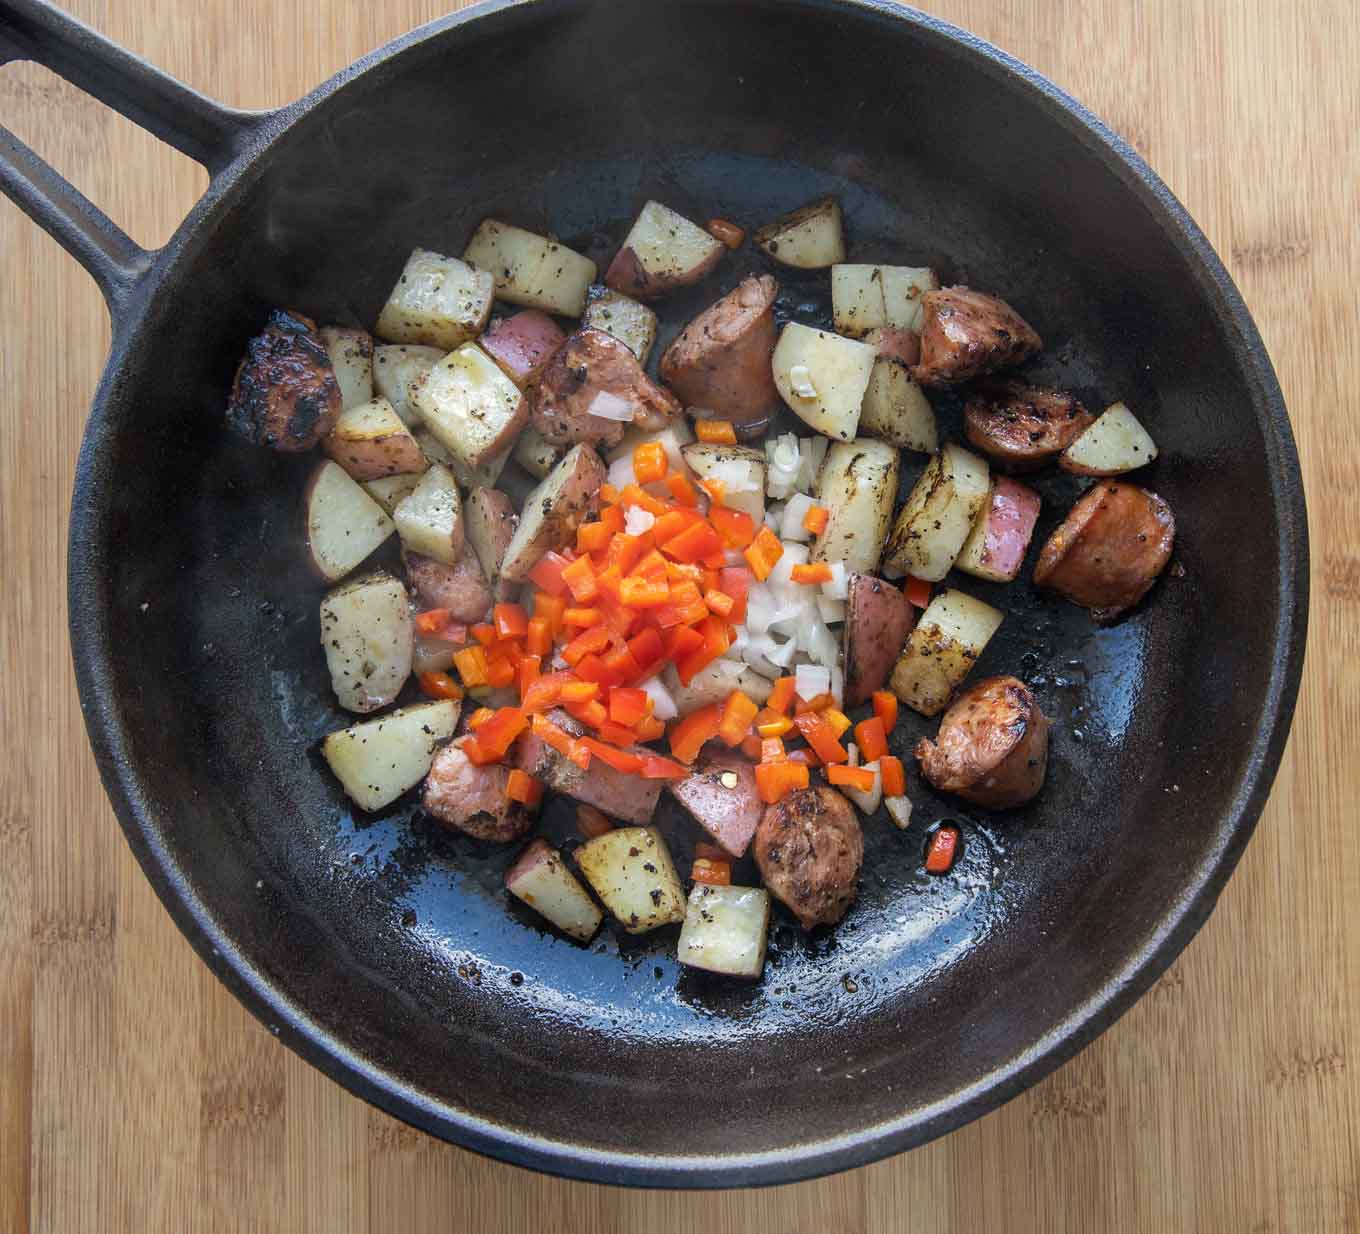 cast iron skillet with potatoes, andouille sausage, peppers and onions with a little smoke coming off the pan